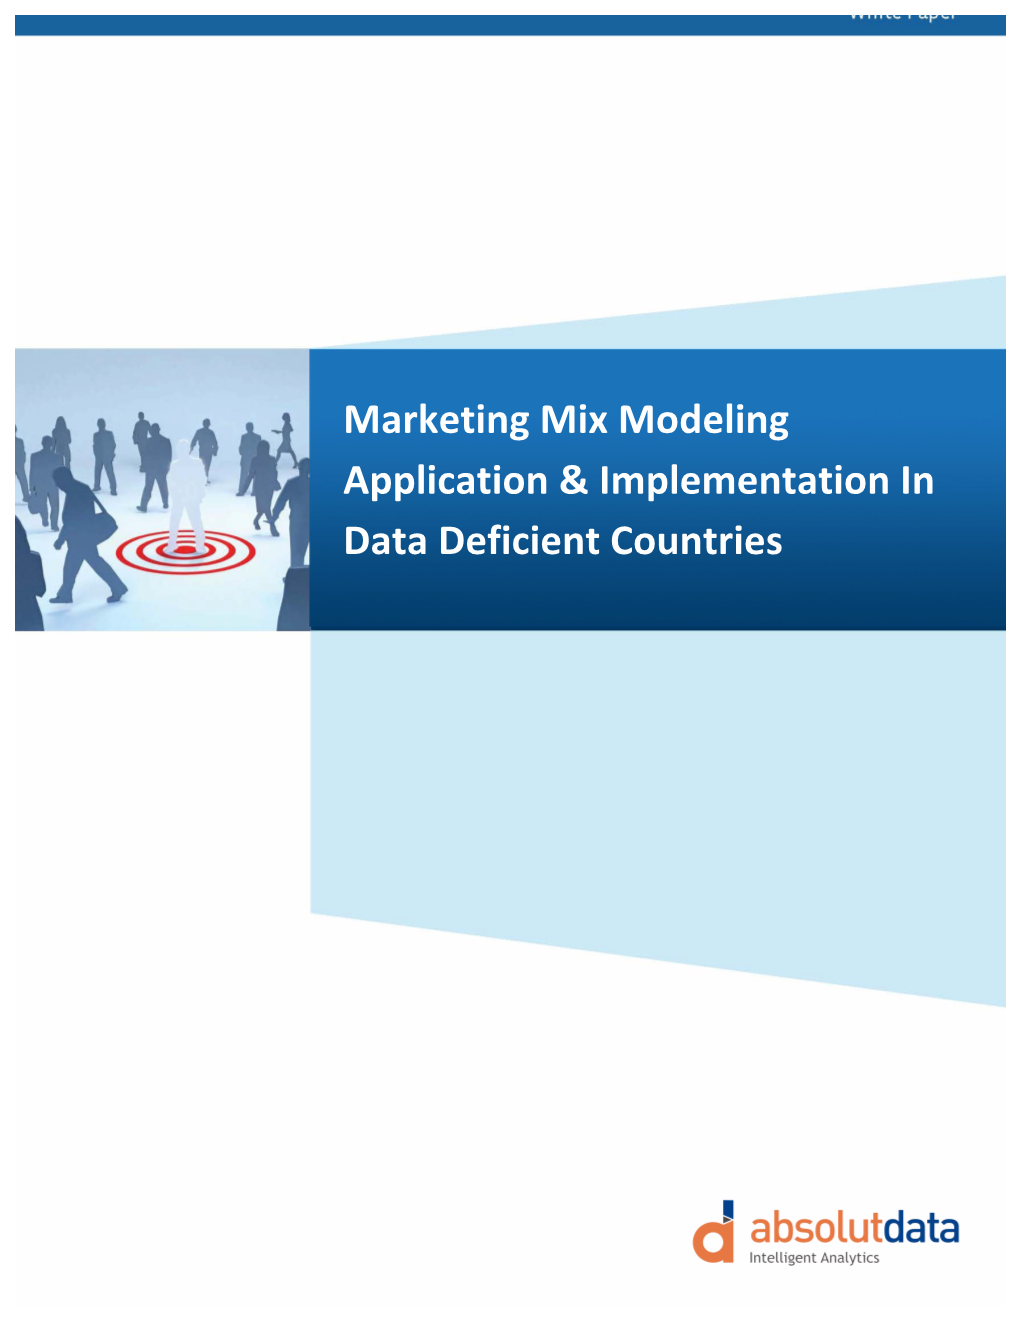 Marketing Mix Modeling Application & Implementation in Data Deficient Countries